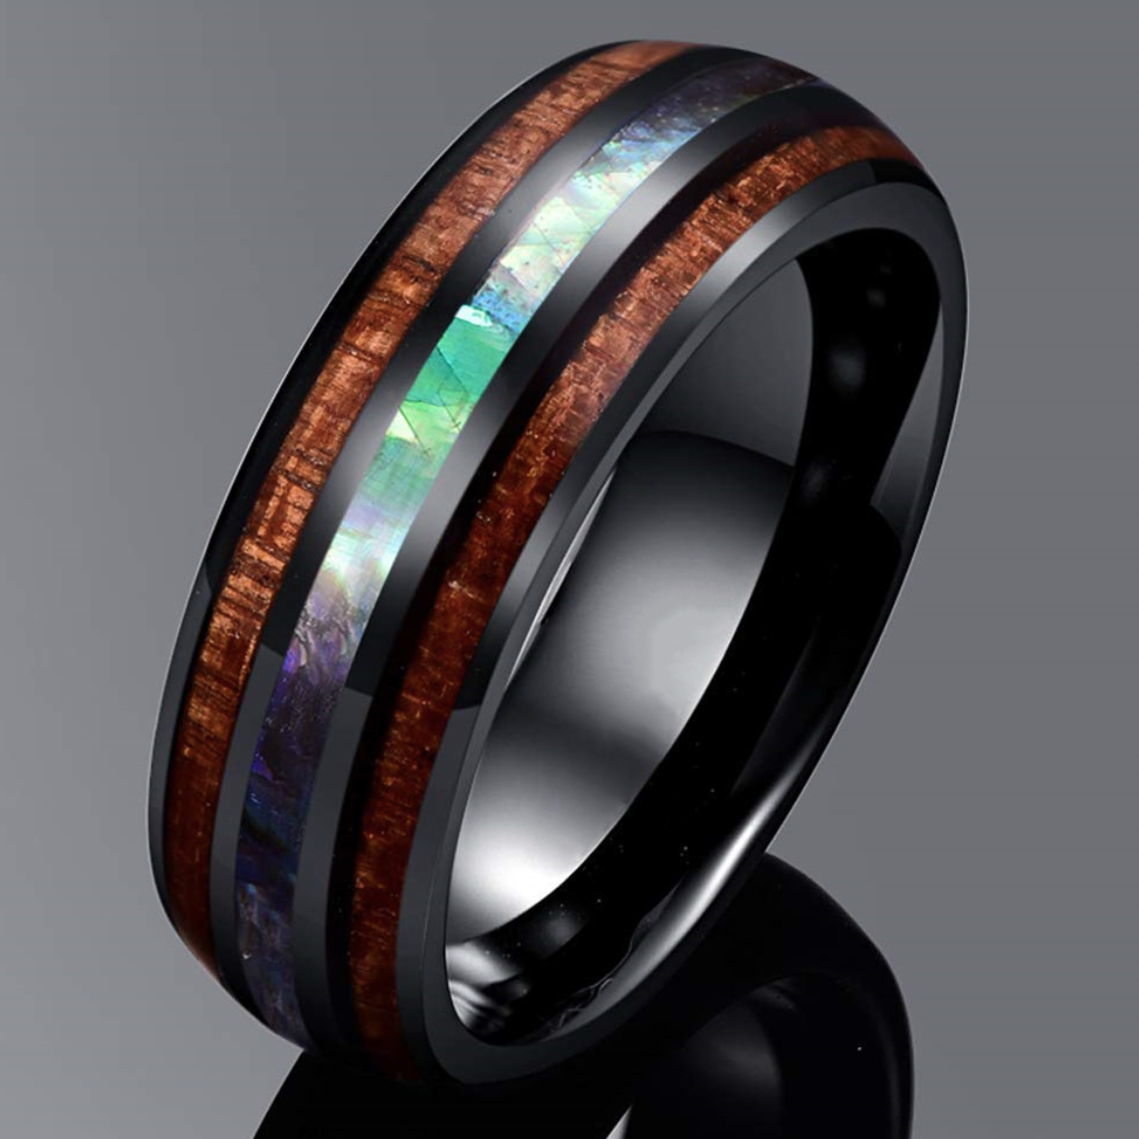 Graduation gift jewelry for female friend Cocktail ring Tungsten steel ring Smooth edges